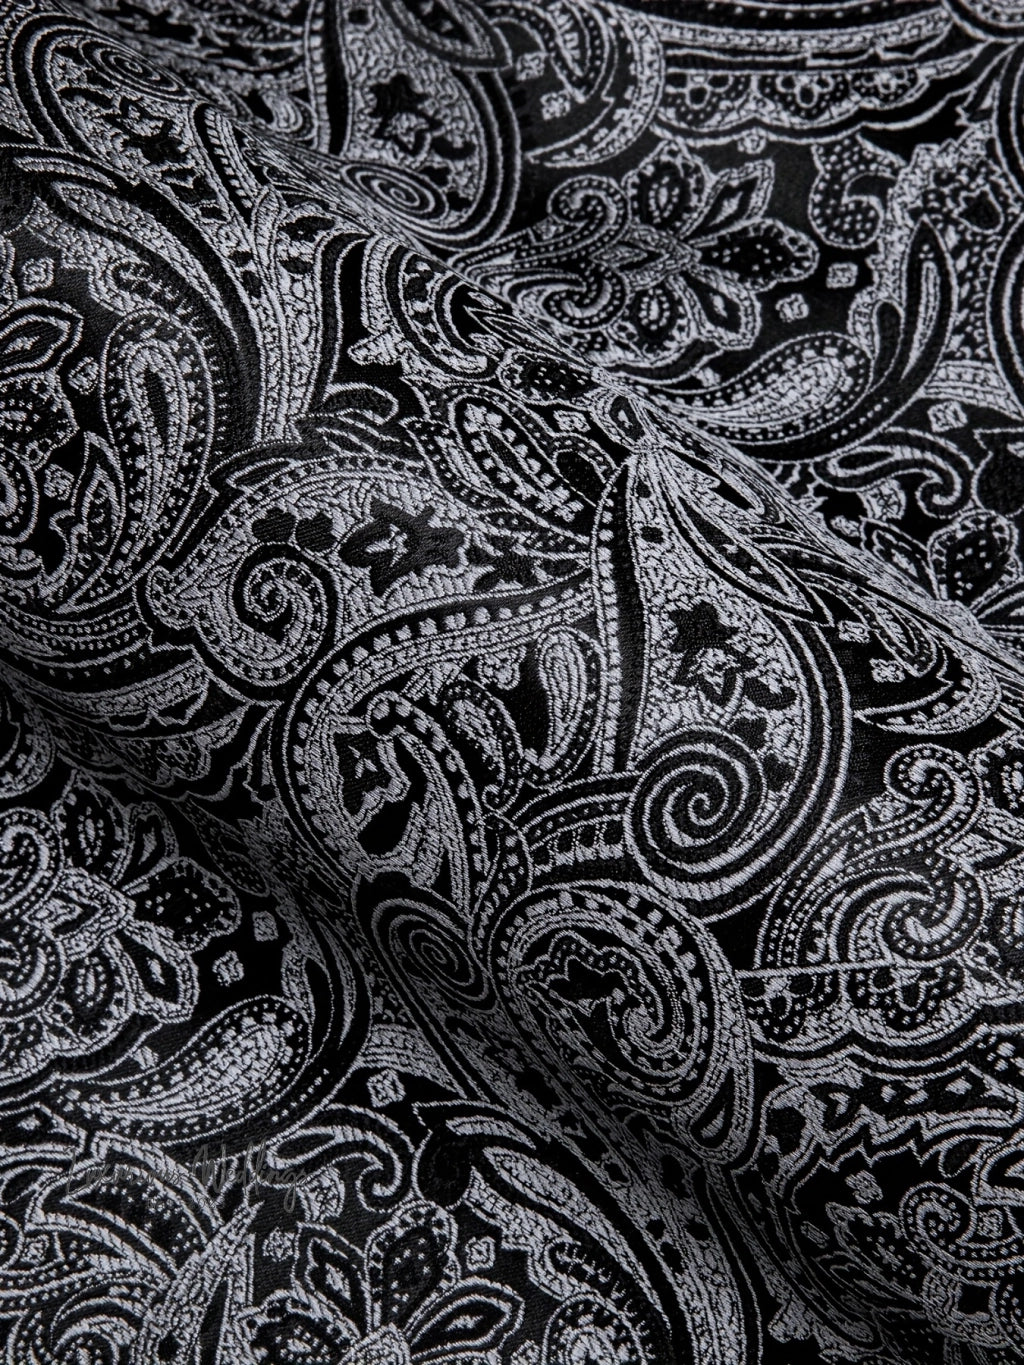 a close up of a black and white paisley print fabric